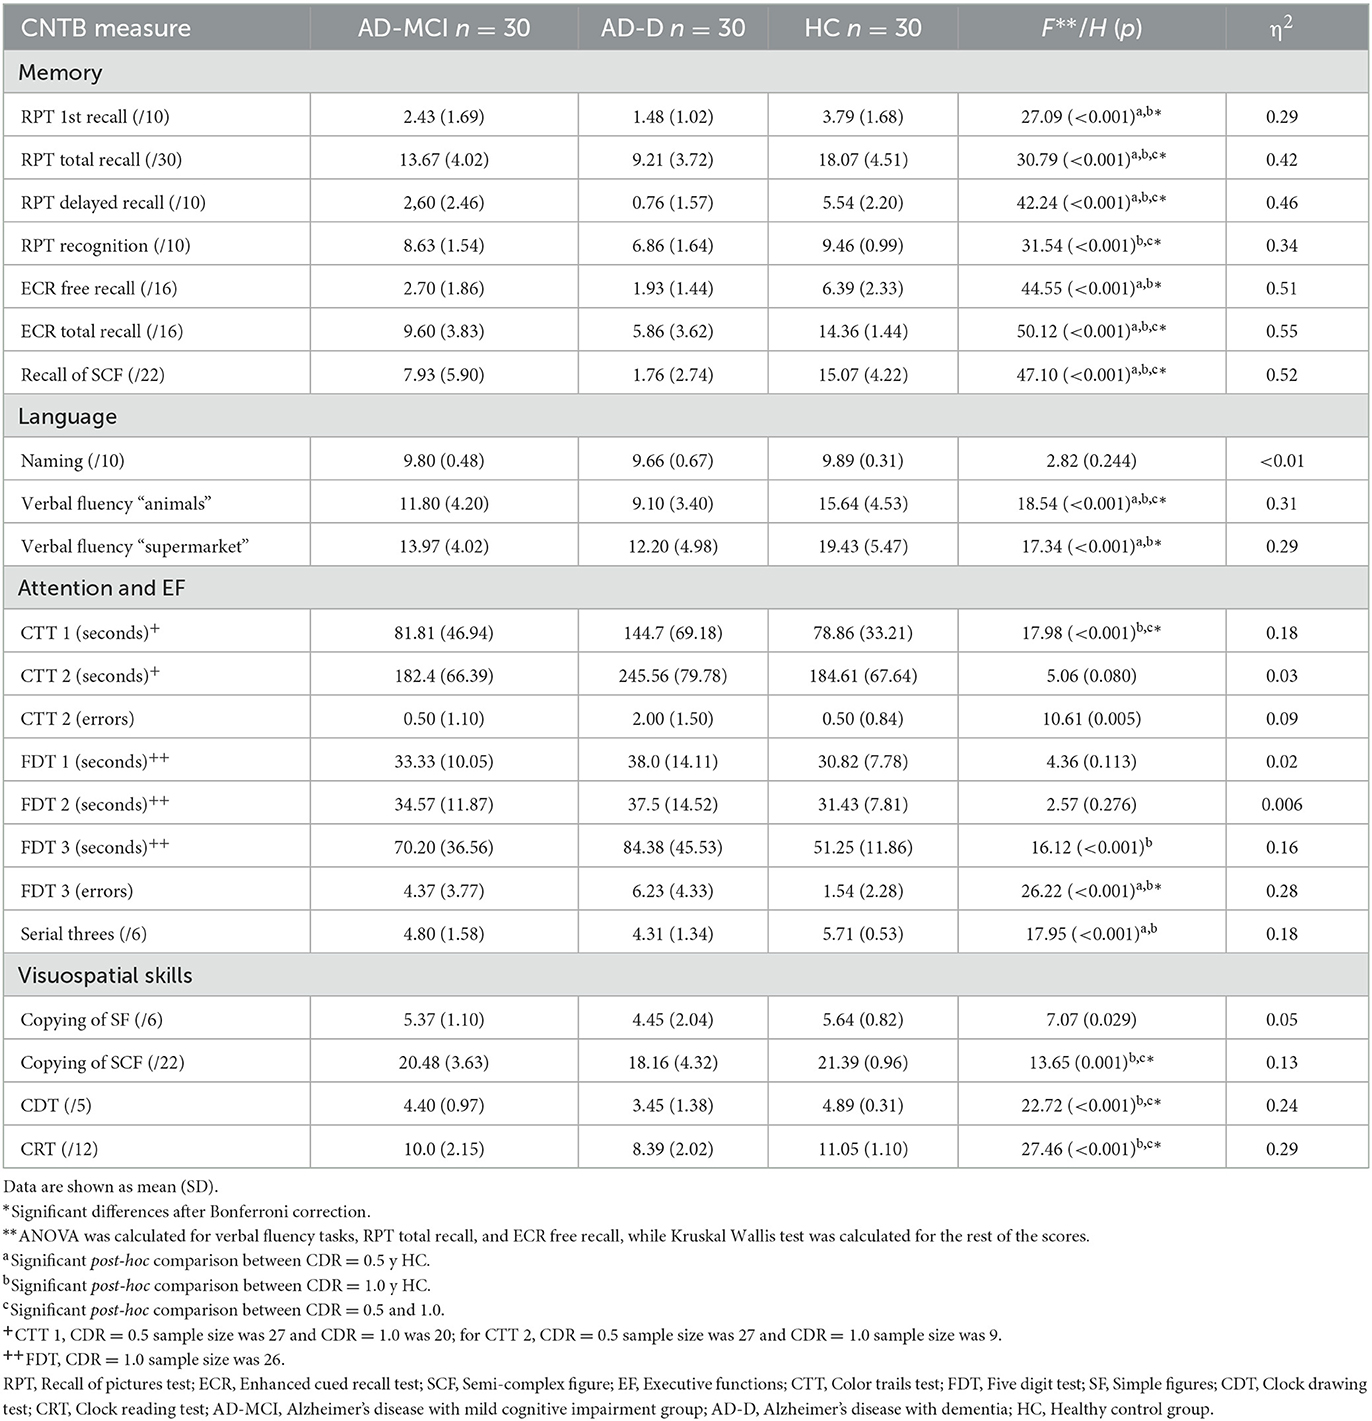 Frontiers  Validation of the European Cross-Cultural Neuropsychological  Test Battery (CNTB) for the assessment of mild cognitive impairment due to  Alzheimer's disease and Parkinson's disease